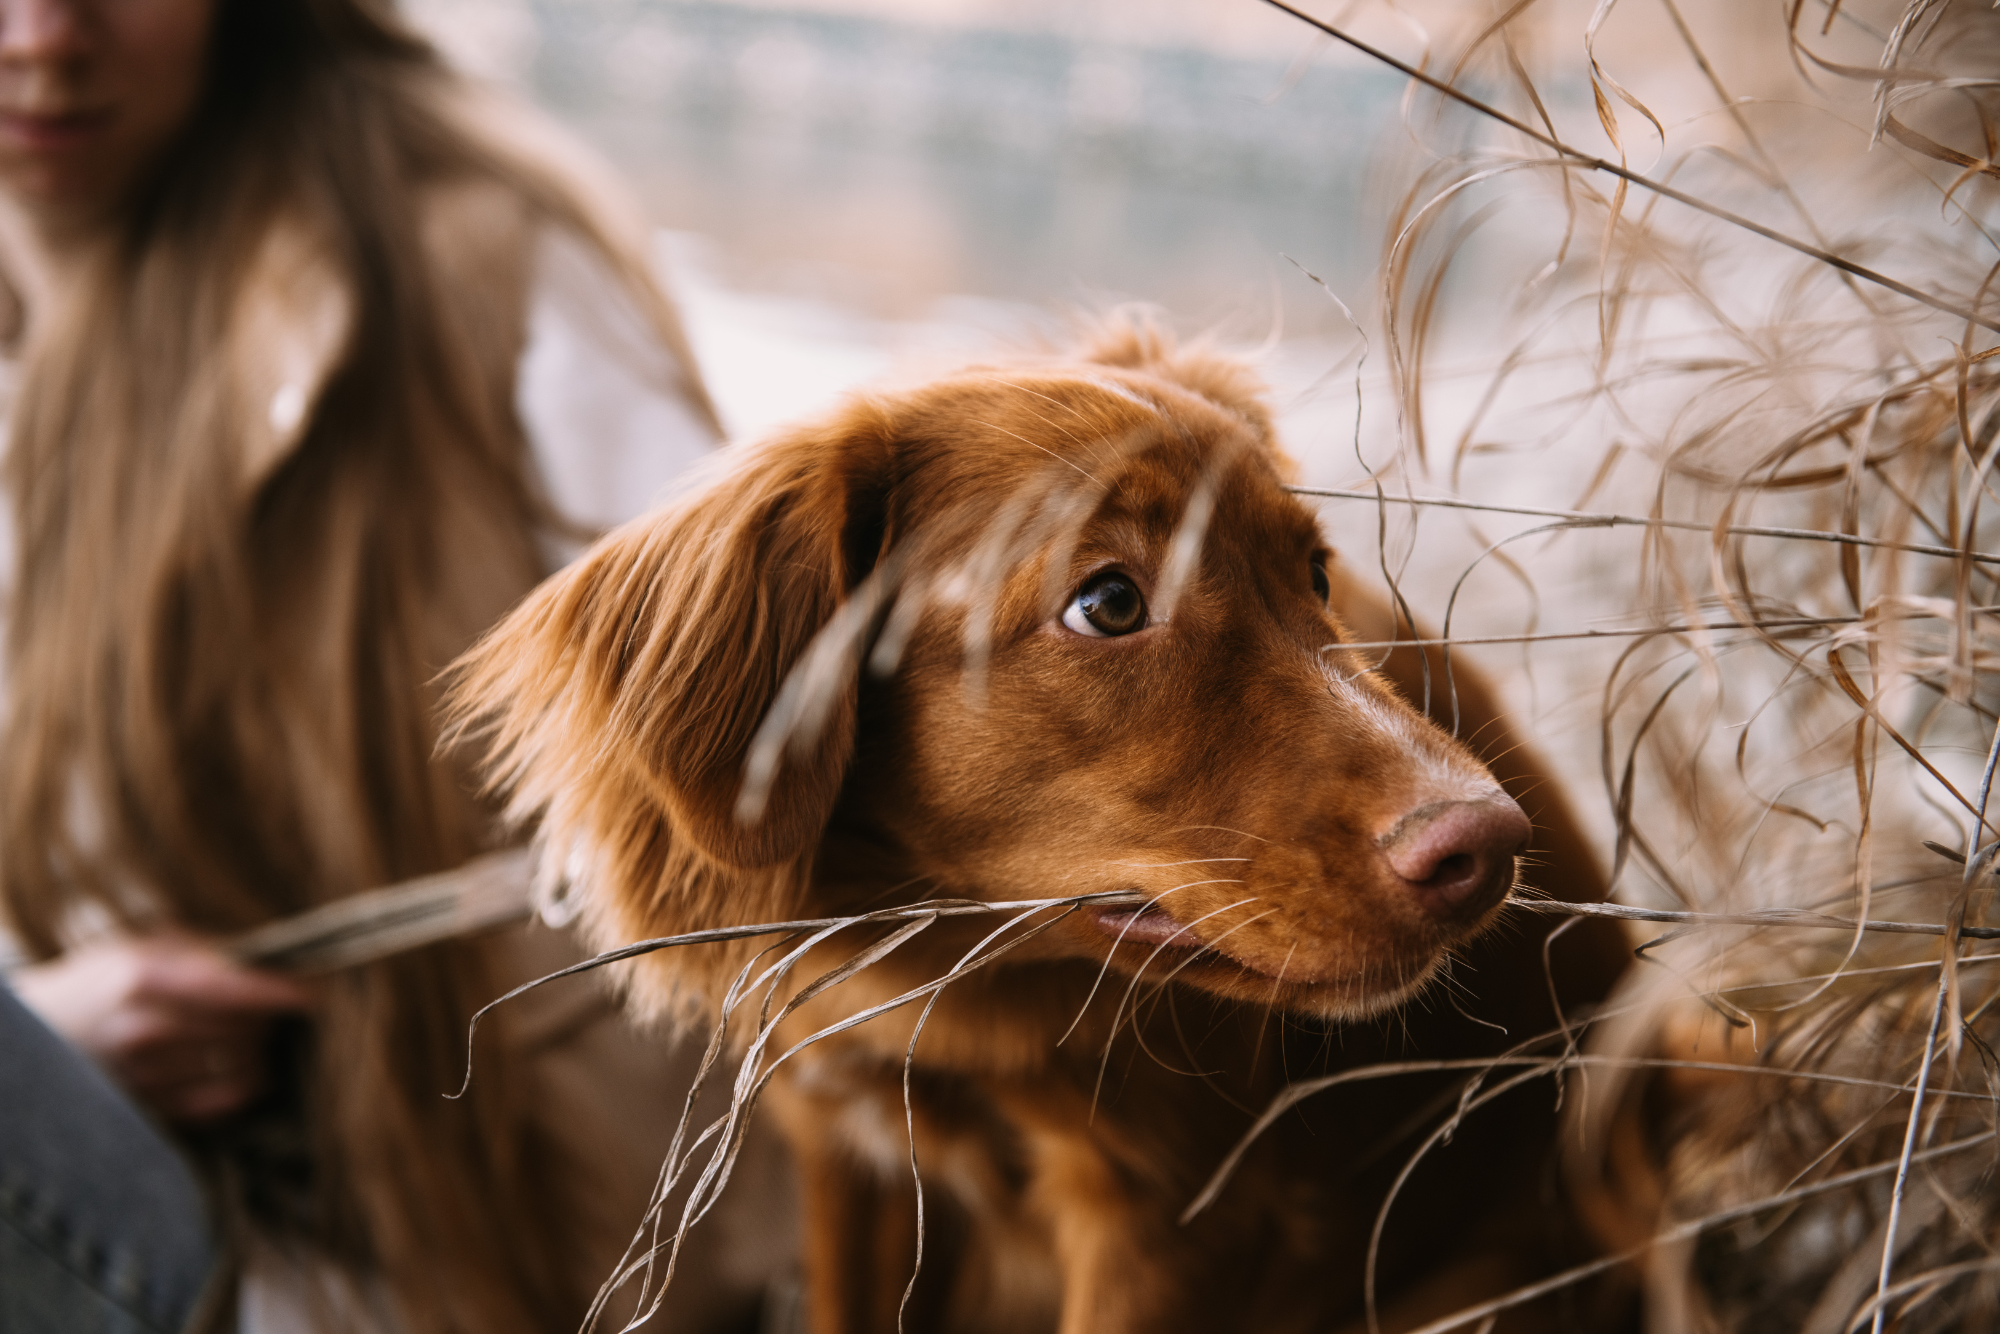 What Causes Anxiety in Dogs?